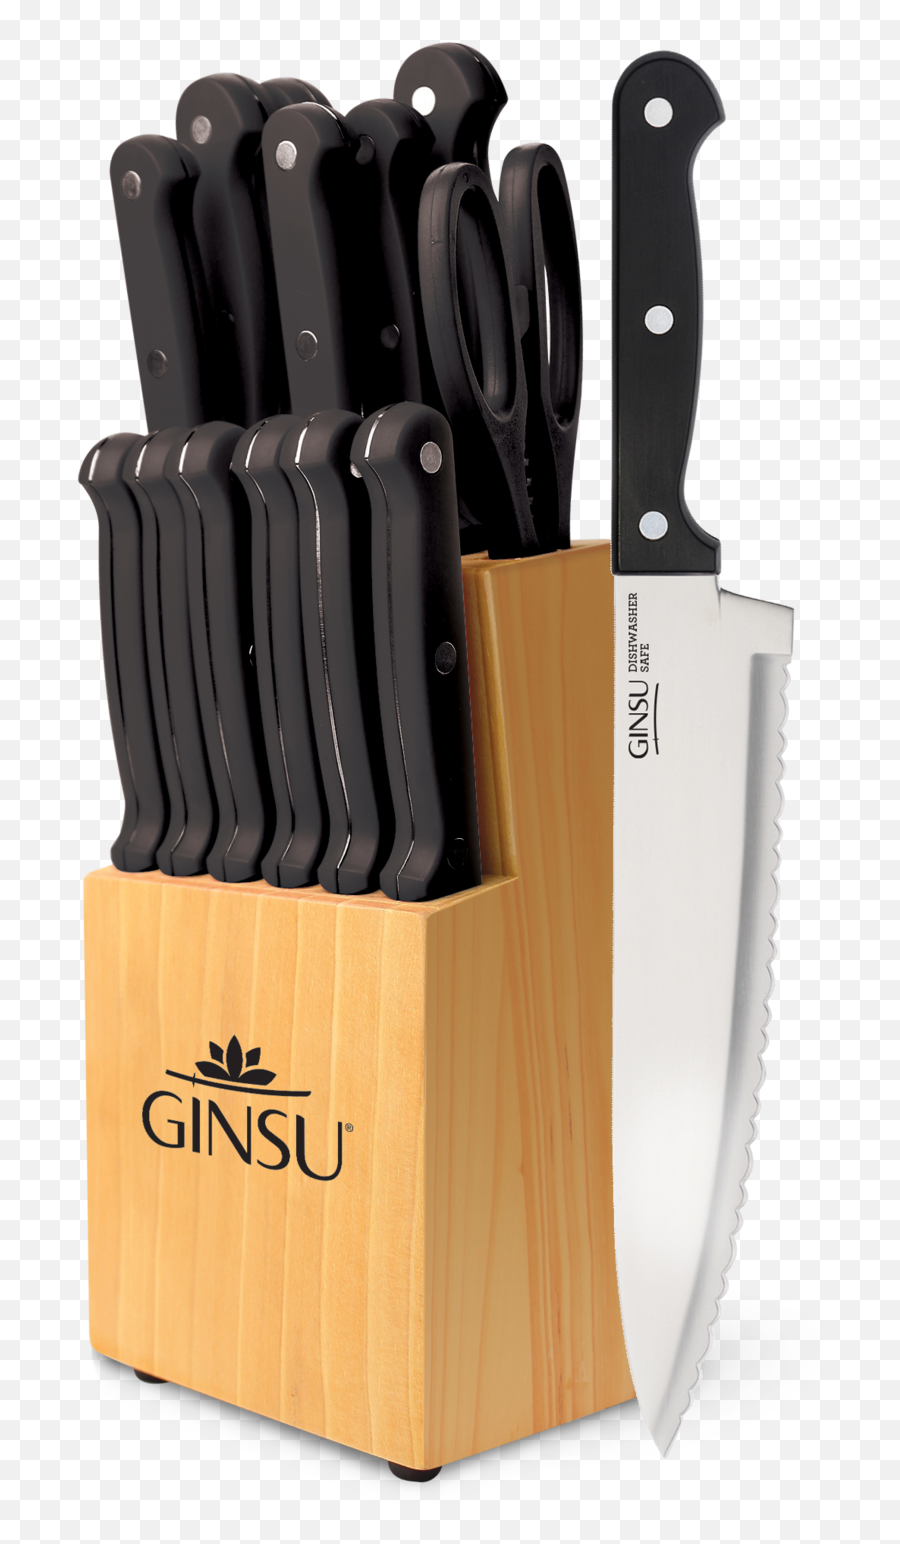 Ginsu Brands Simply Sharp Kitchen Knives And Products Emoji,Fork Knife Emoticon